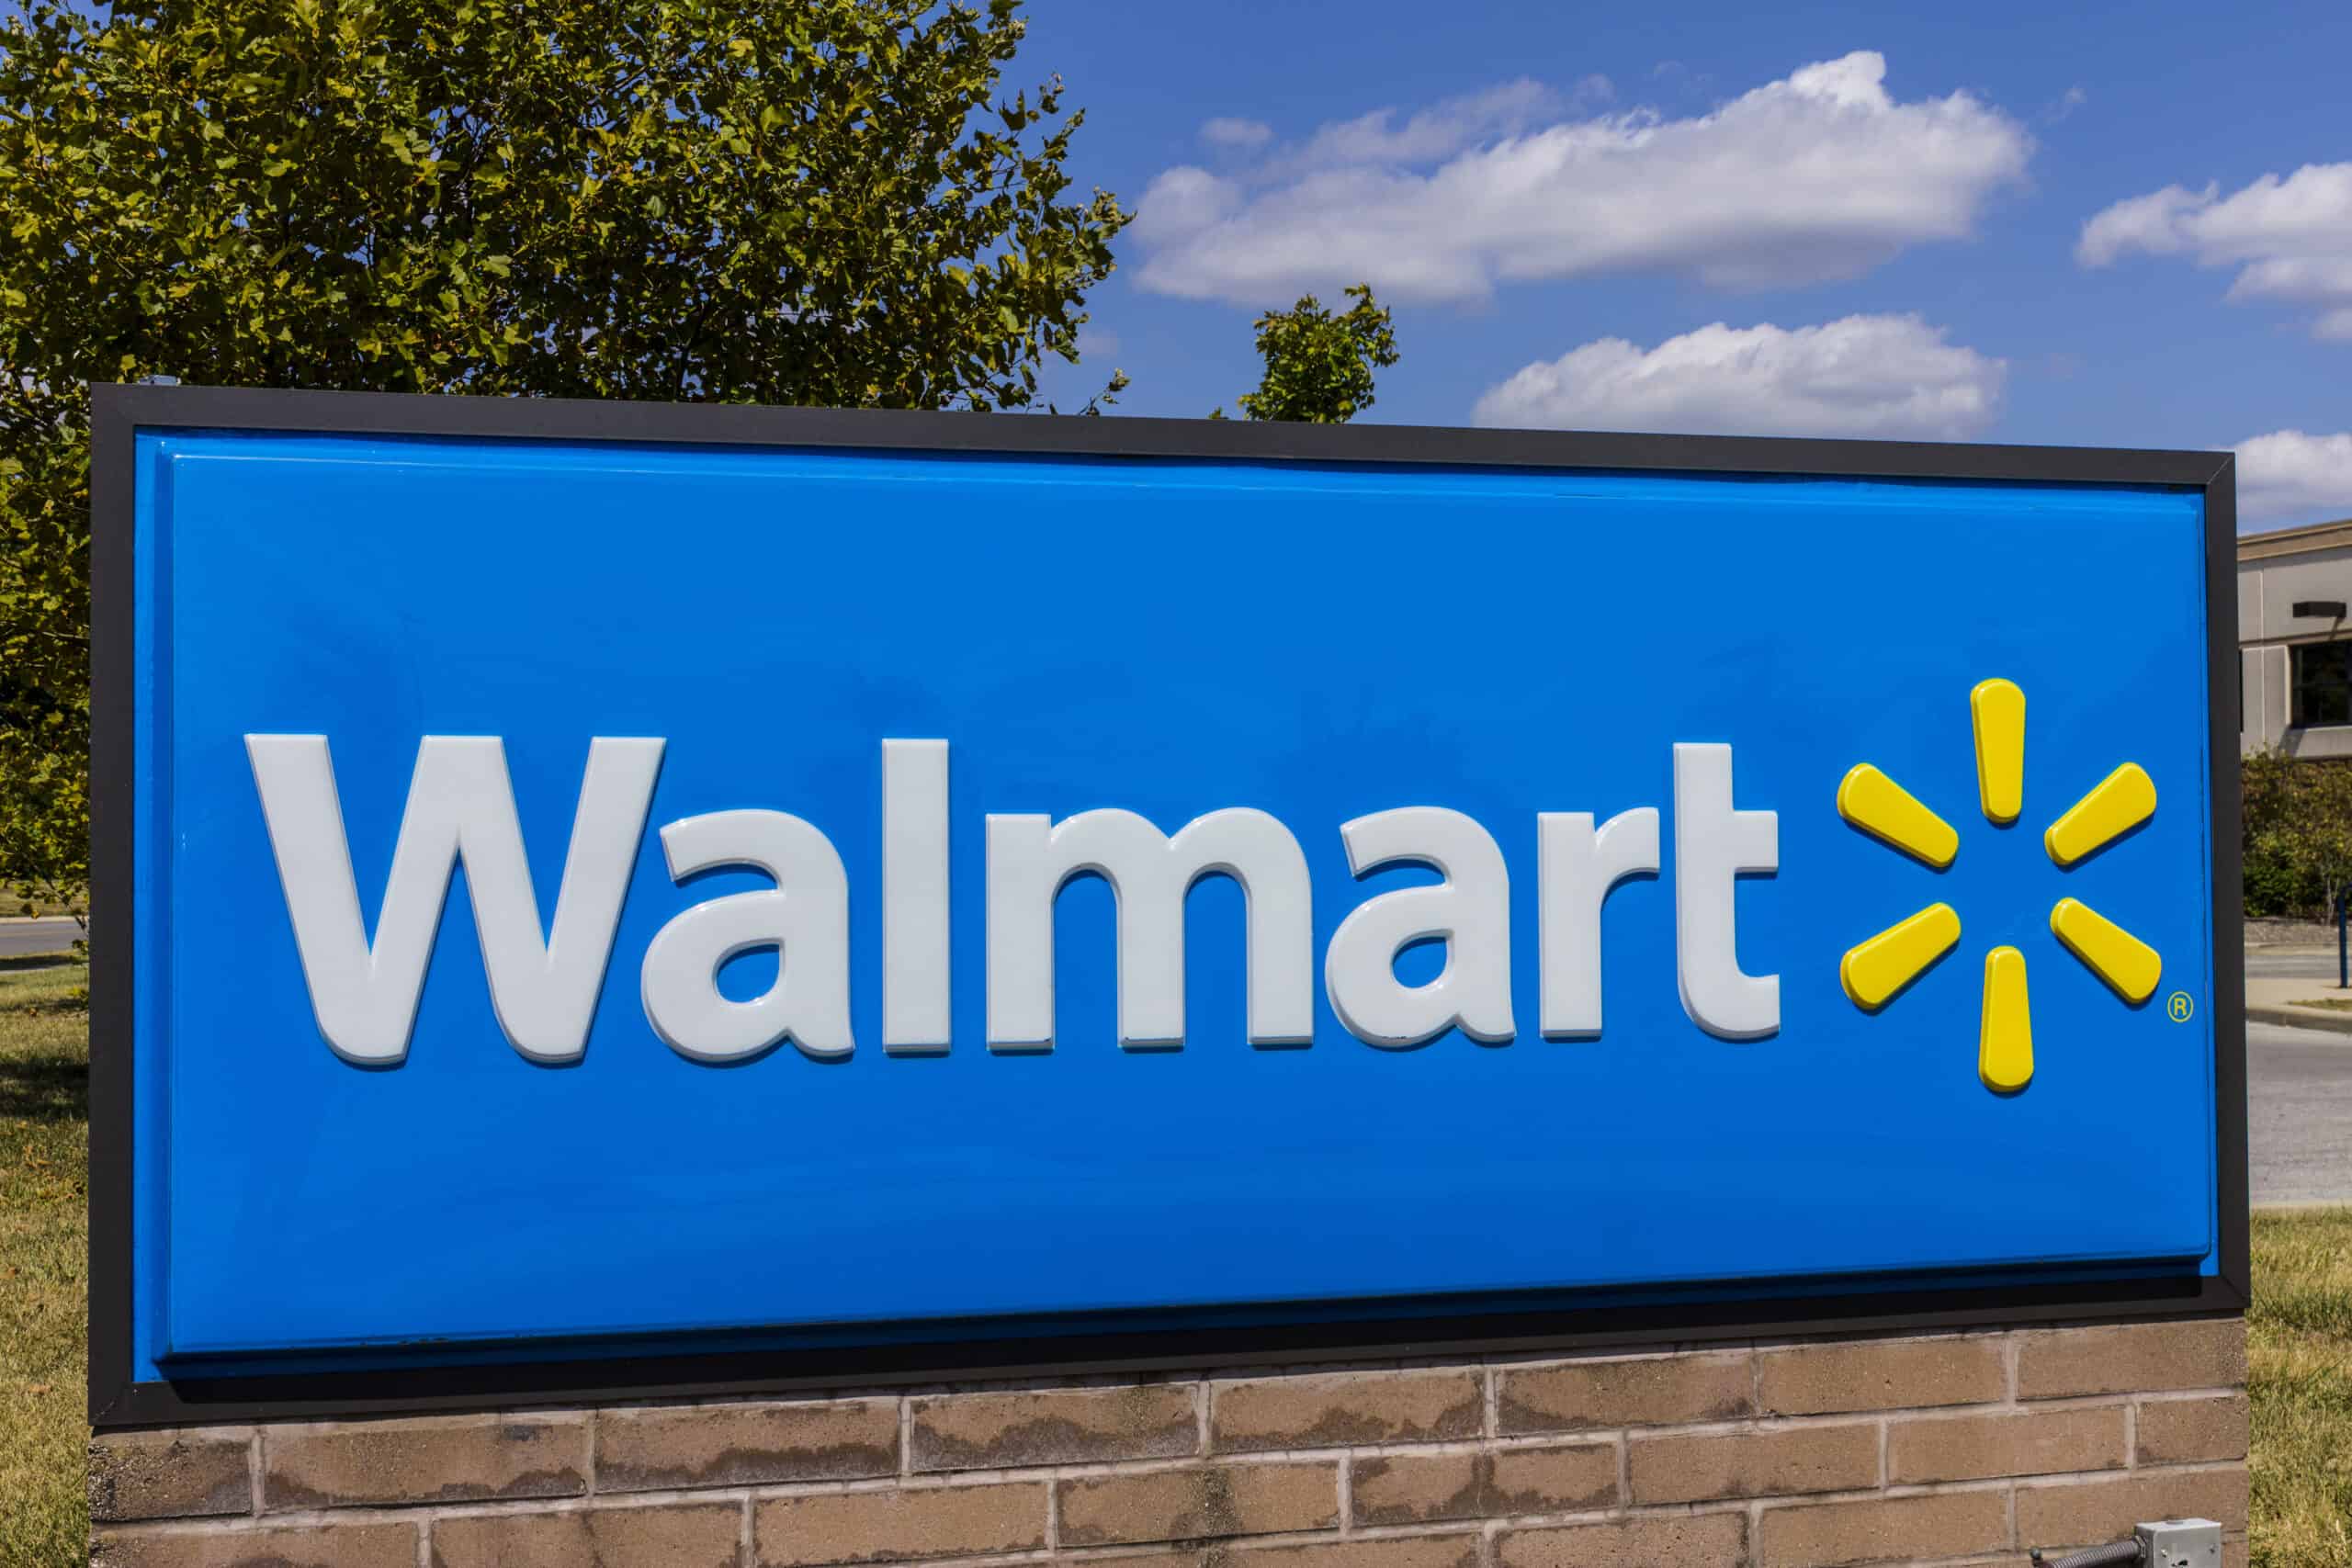 How Much Is It To Print Pictures At Walmart? (2022 Updated)